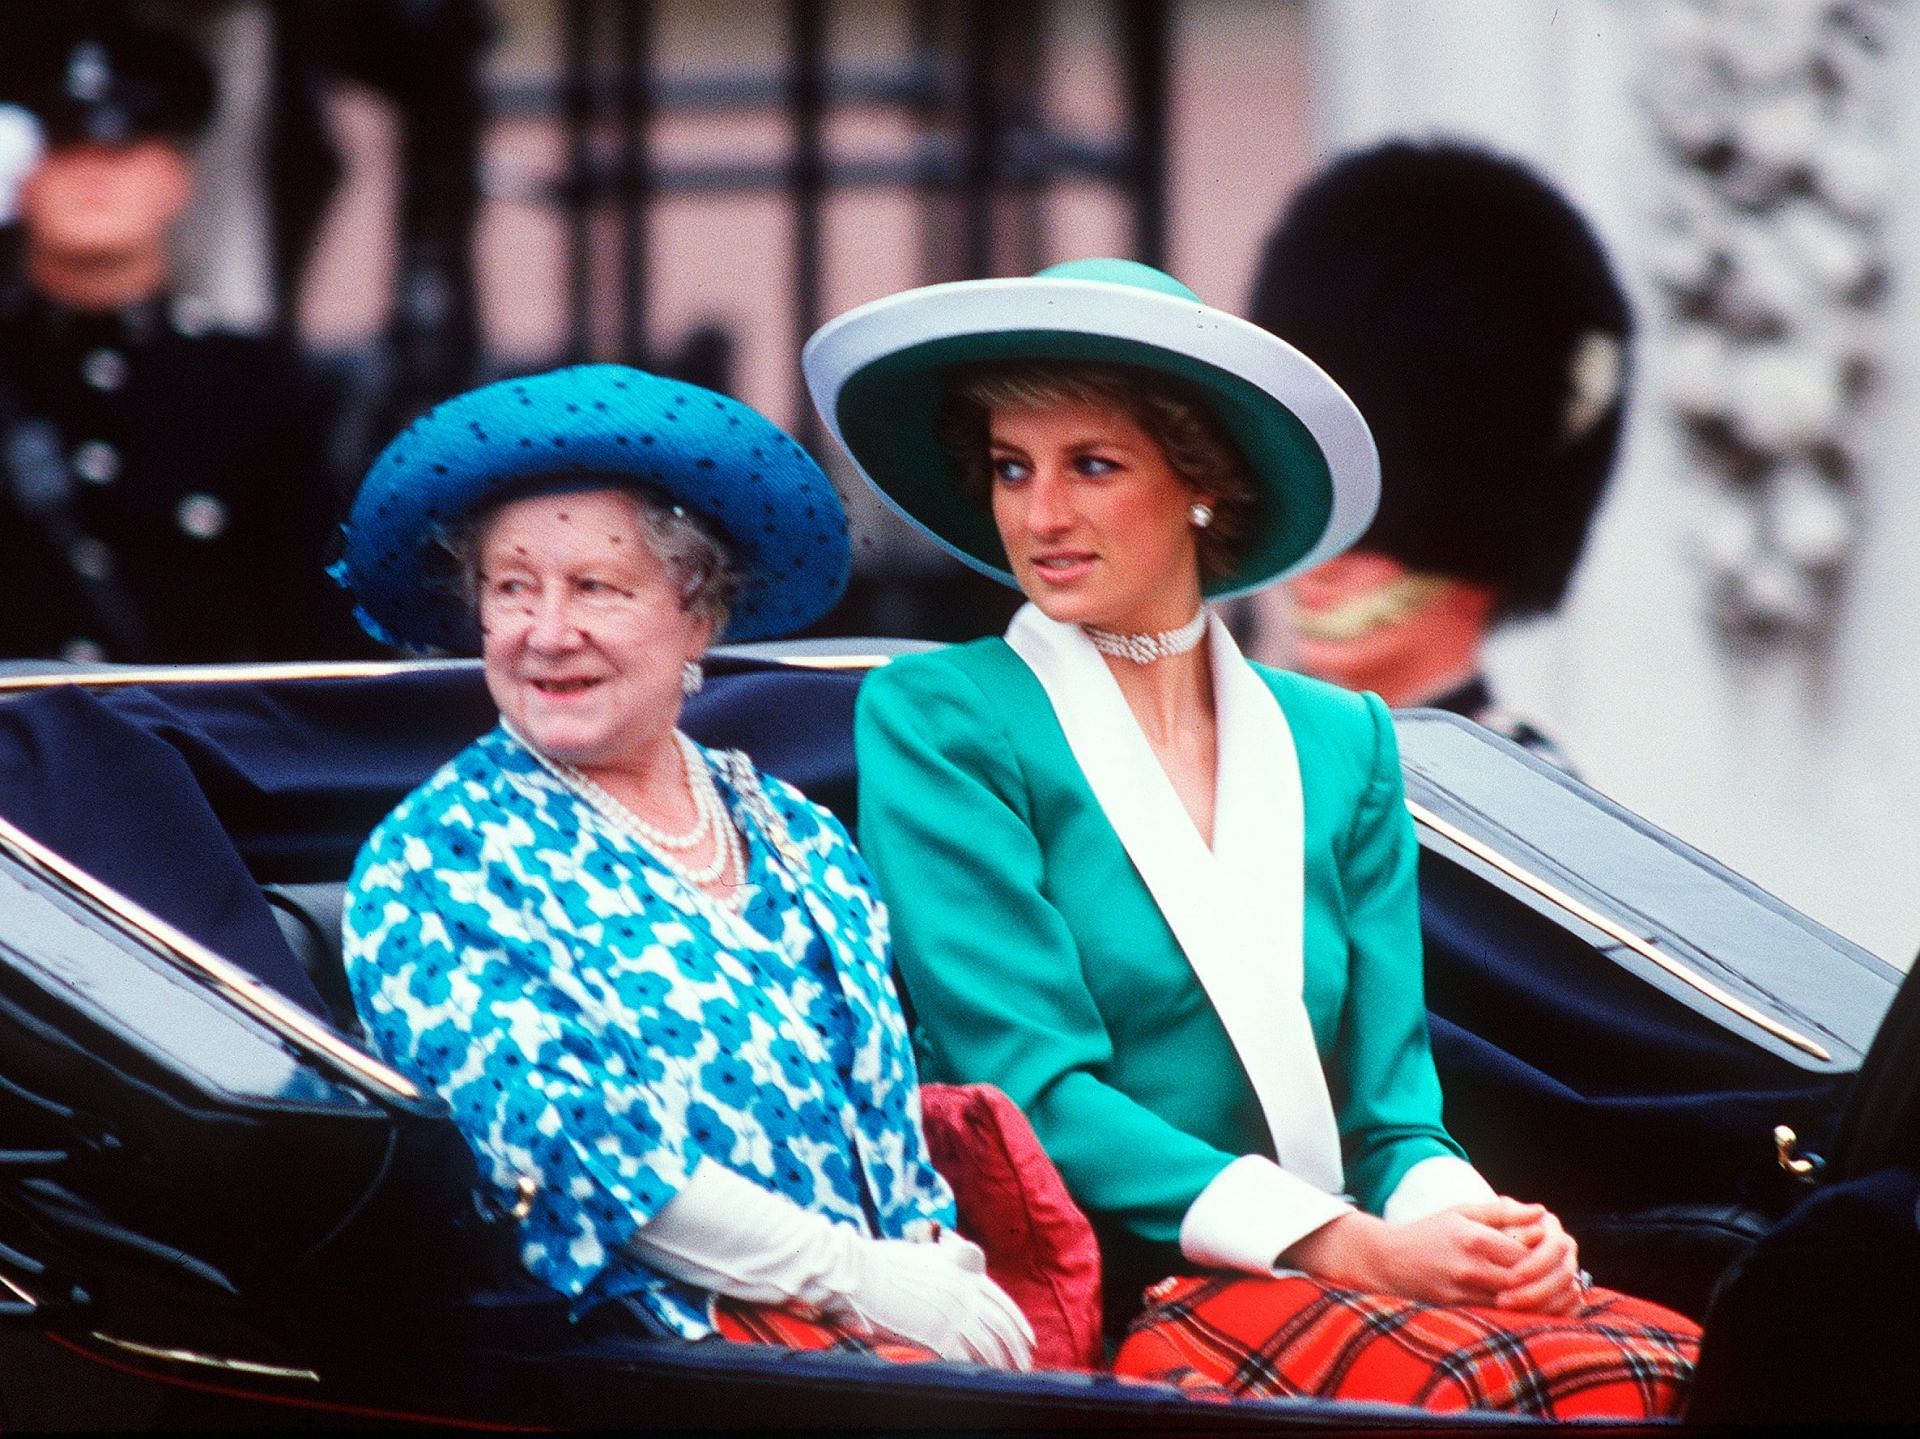 Princess Diana and Queen Elizabeth memes flood the internet (Image via Getty Images)